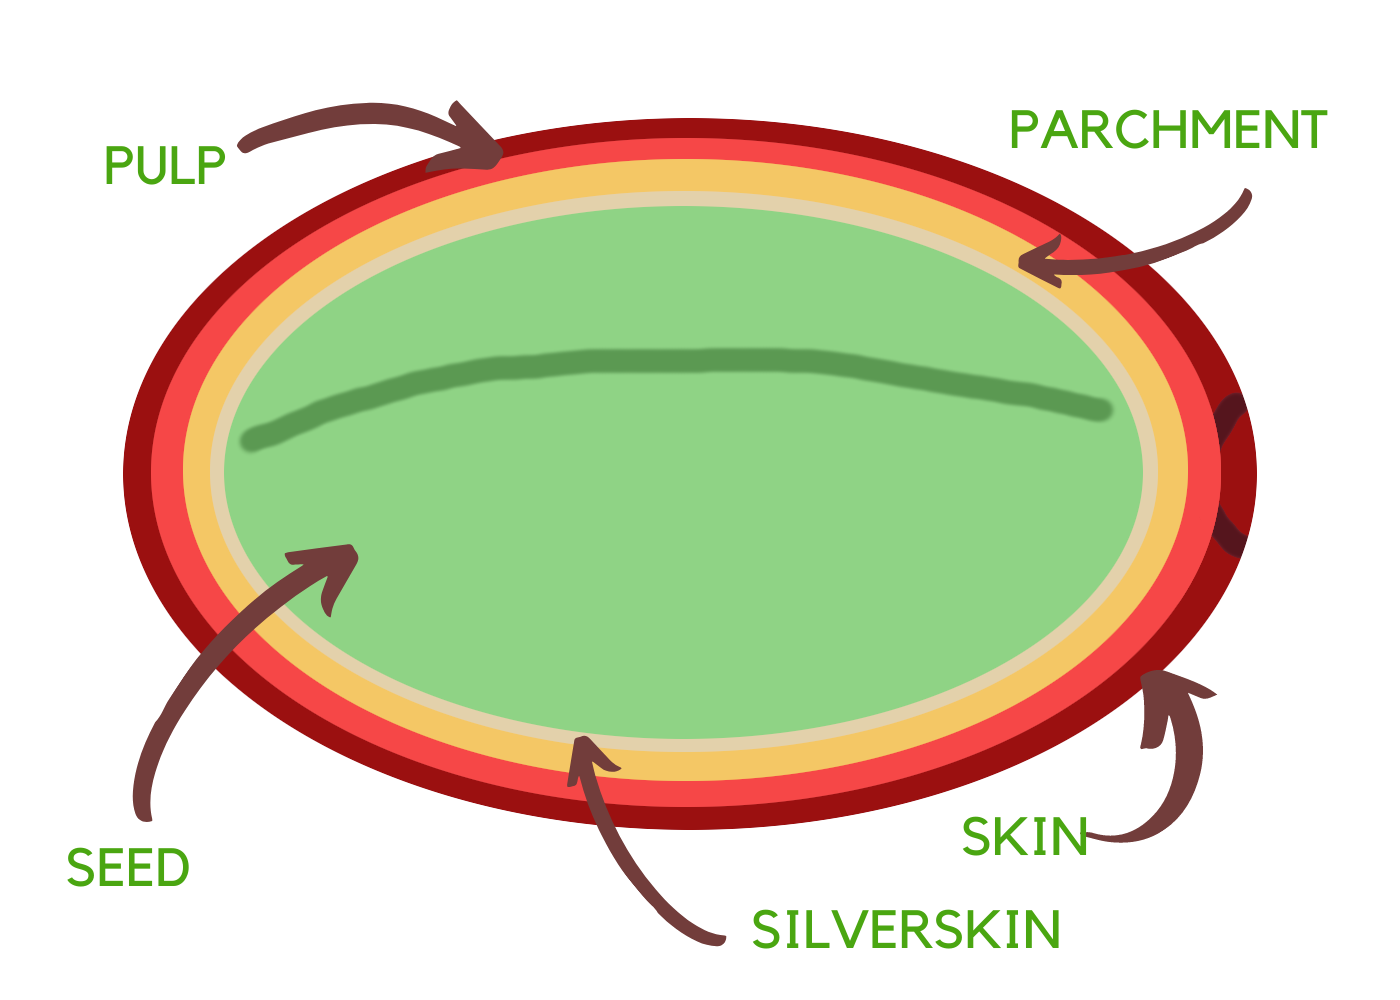 an illustration of all the layers from the previous paragraph-- skin, pulp, parchment, and silverskin